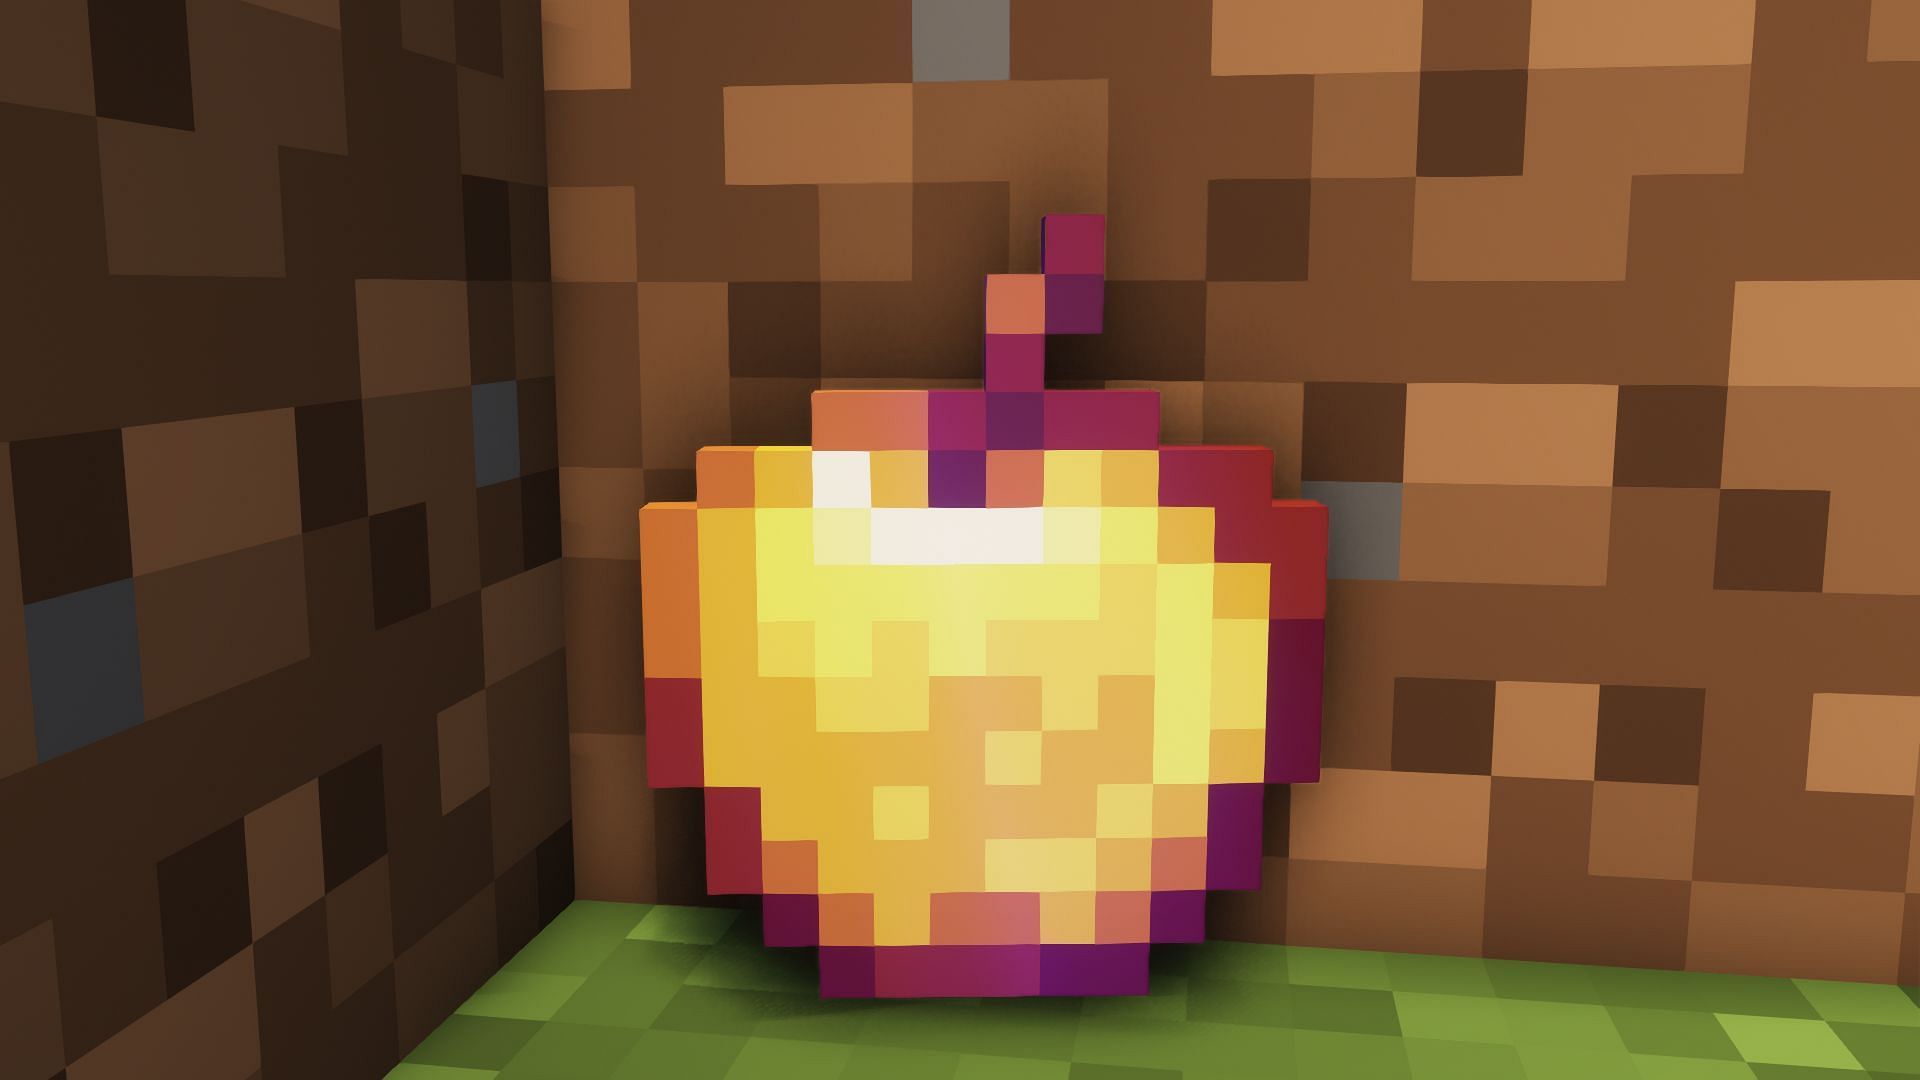 An enchanted golden apple in the game (Image via Minecraft)